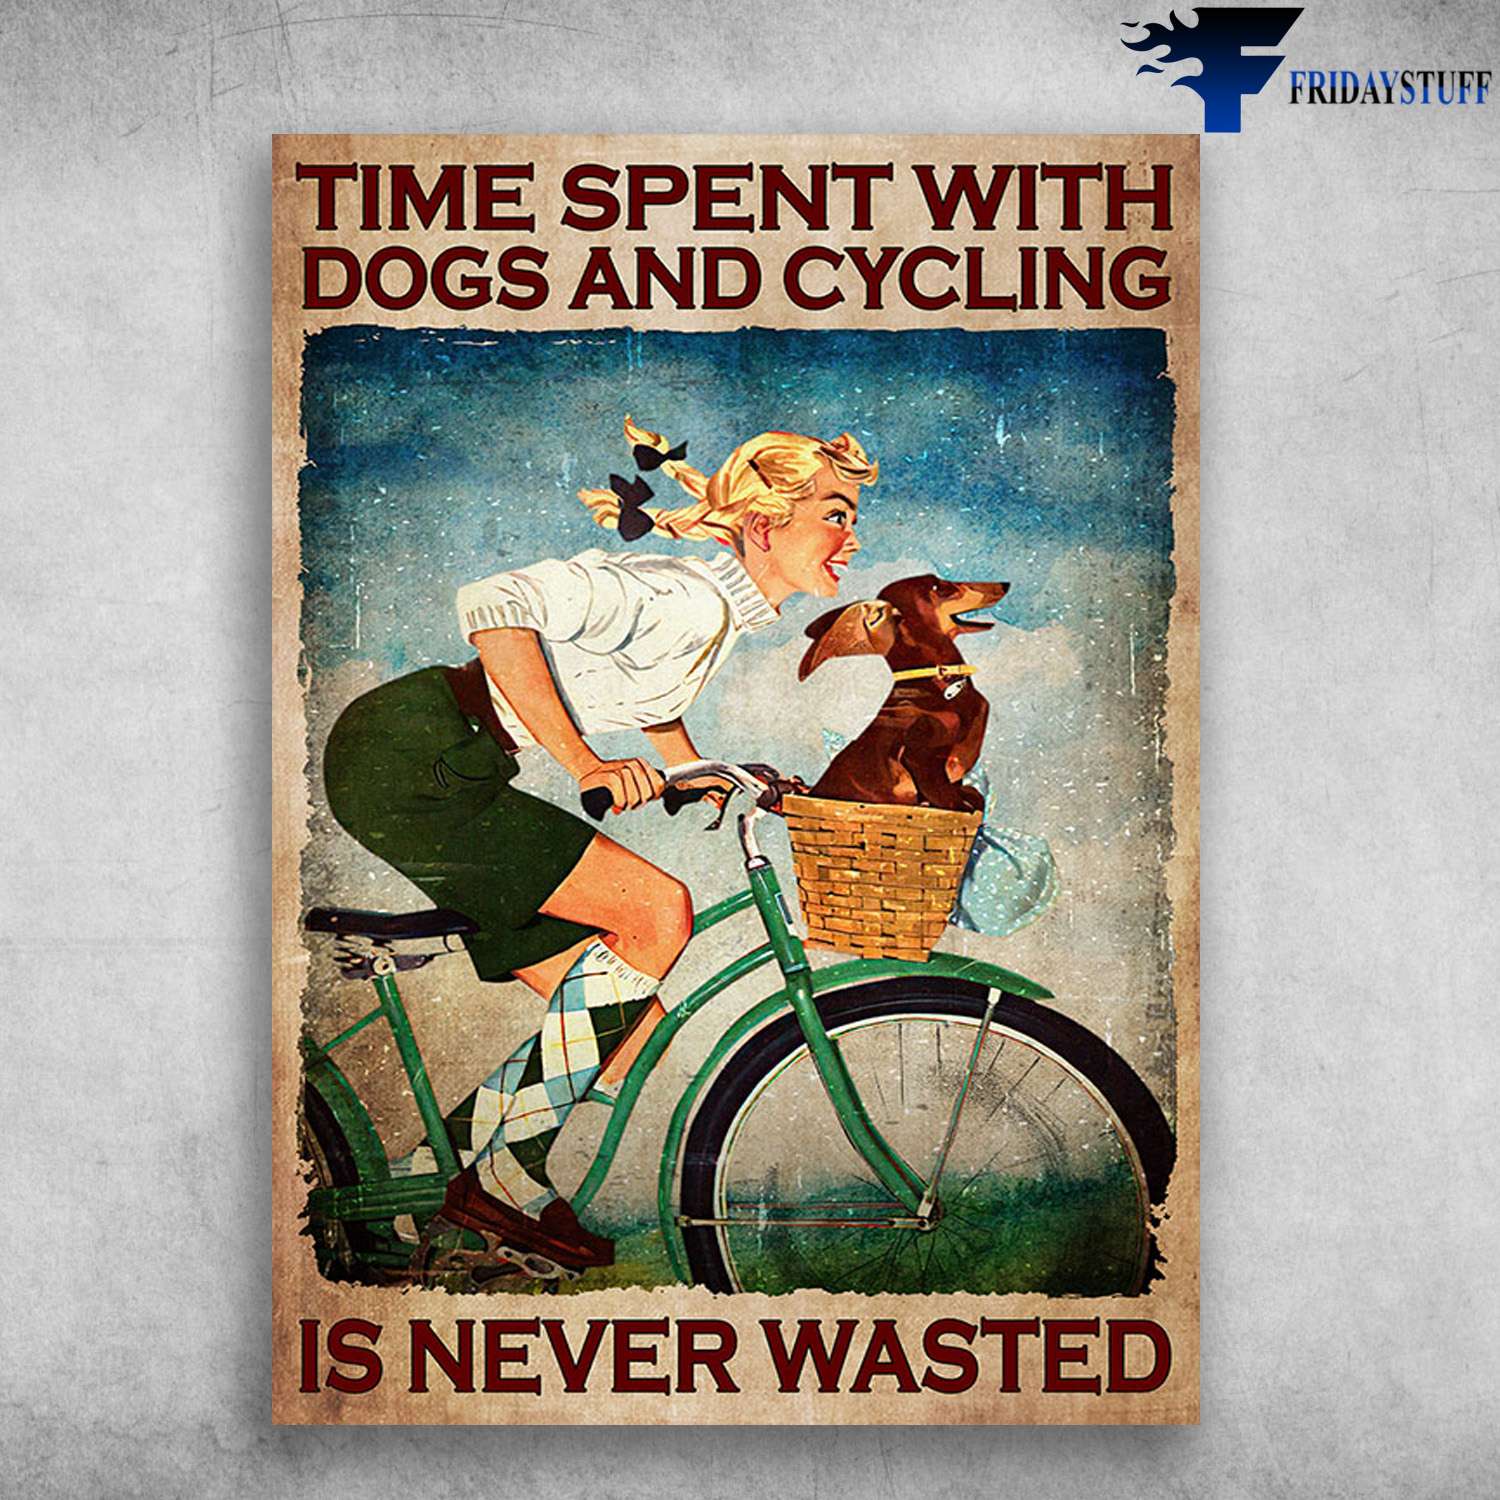 Girl Cycling Dachshund - Time Spent With, Dog And Cycling, Is Never Wasted